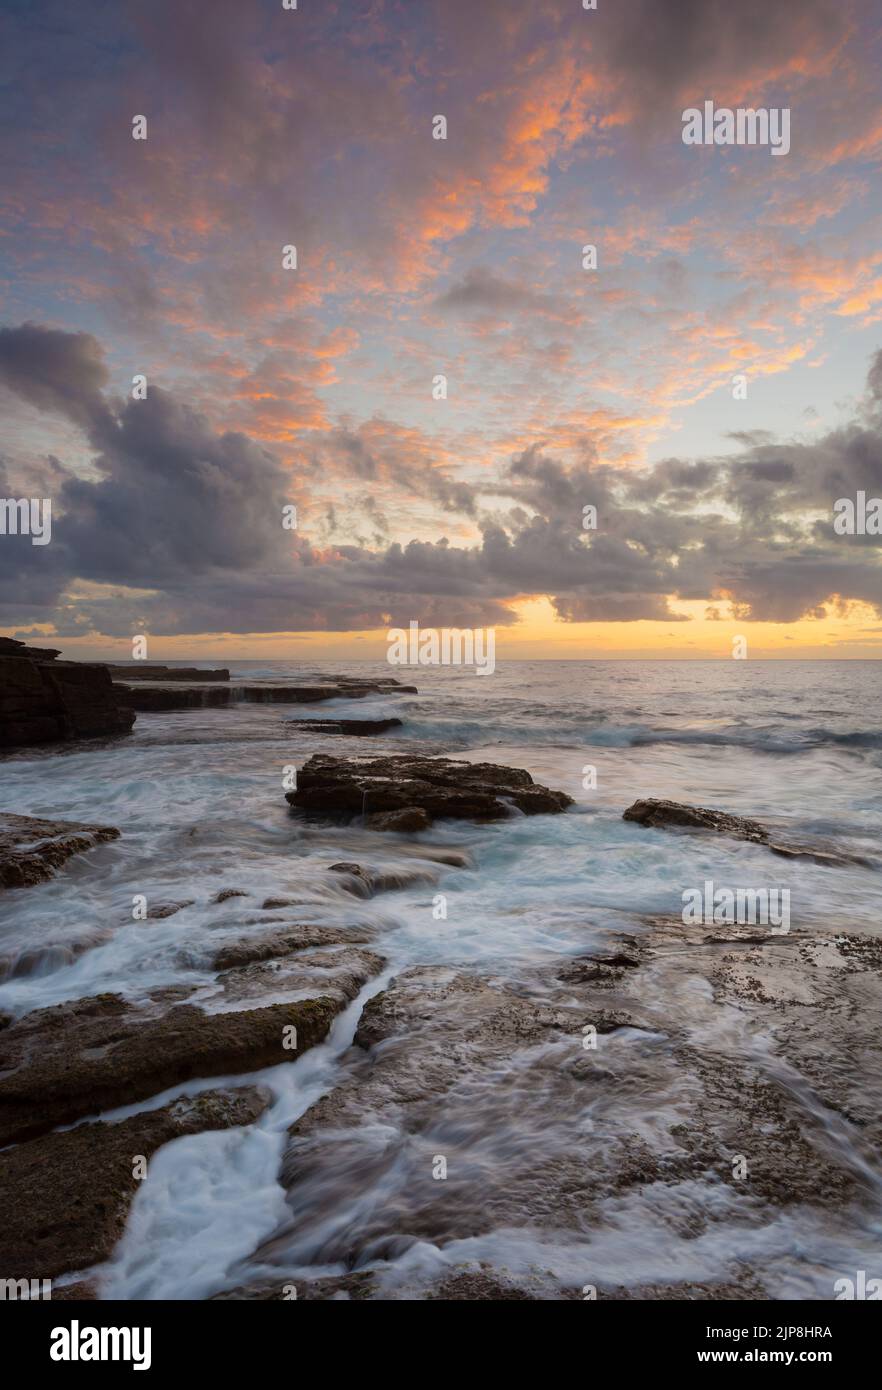 Sunrise over rocky ocean seascape with incredible clouds display some highlighting the sunrise colours, and water flow over rocks and in crevices Stock Photo